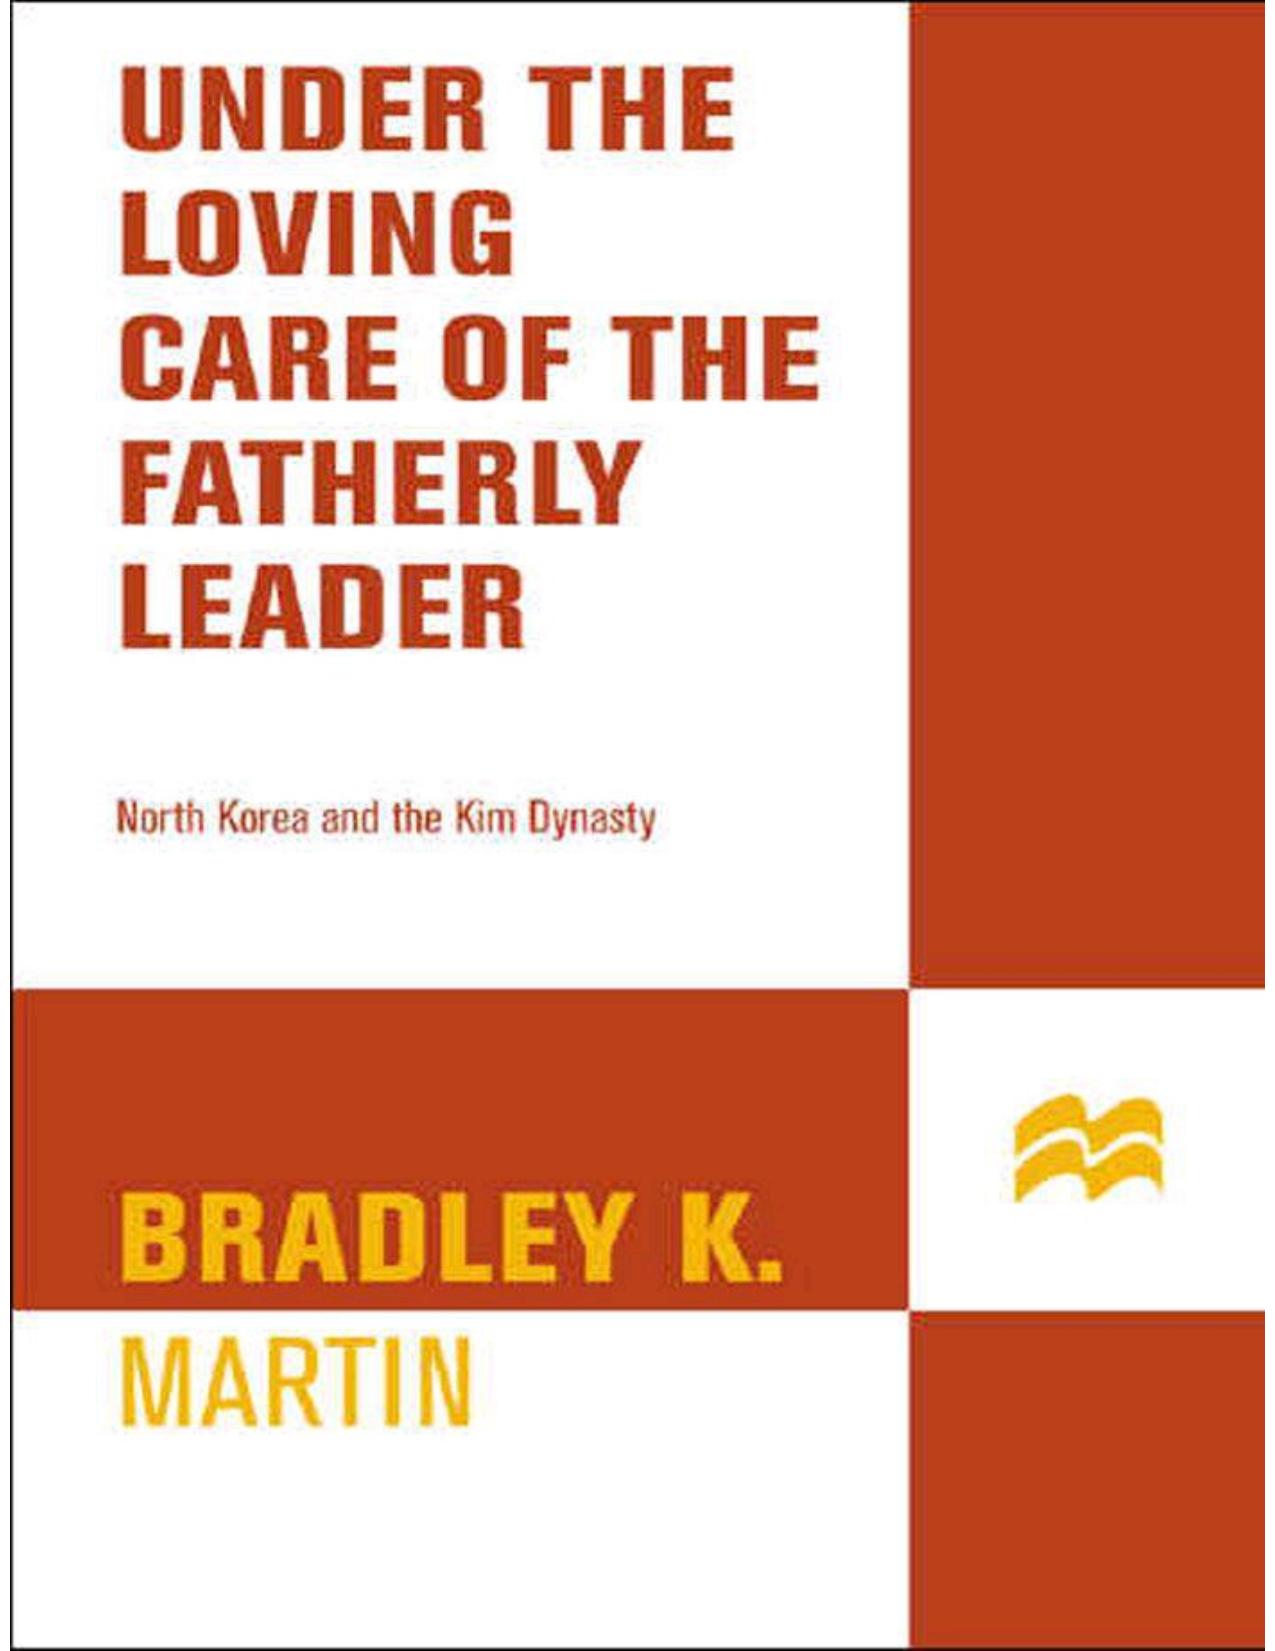 Under the Loving Care of the Fatherly Leader by Martin Bradley K